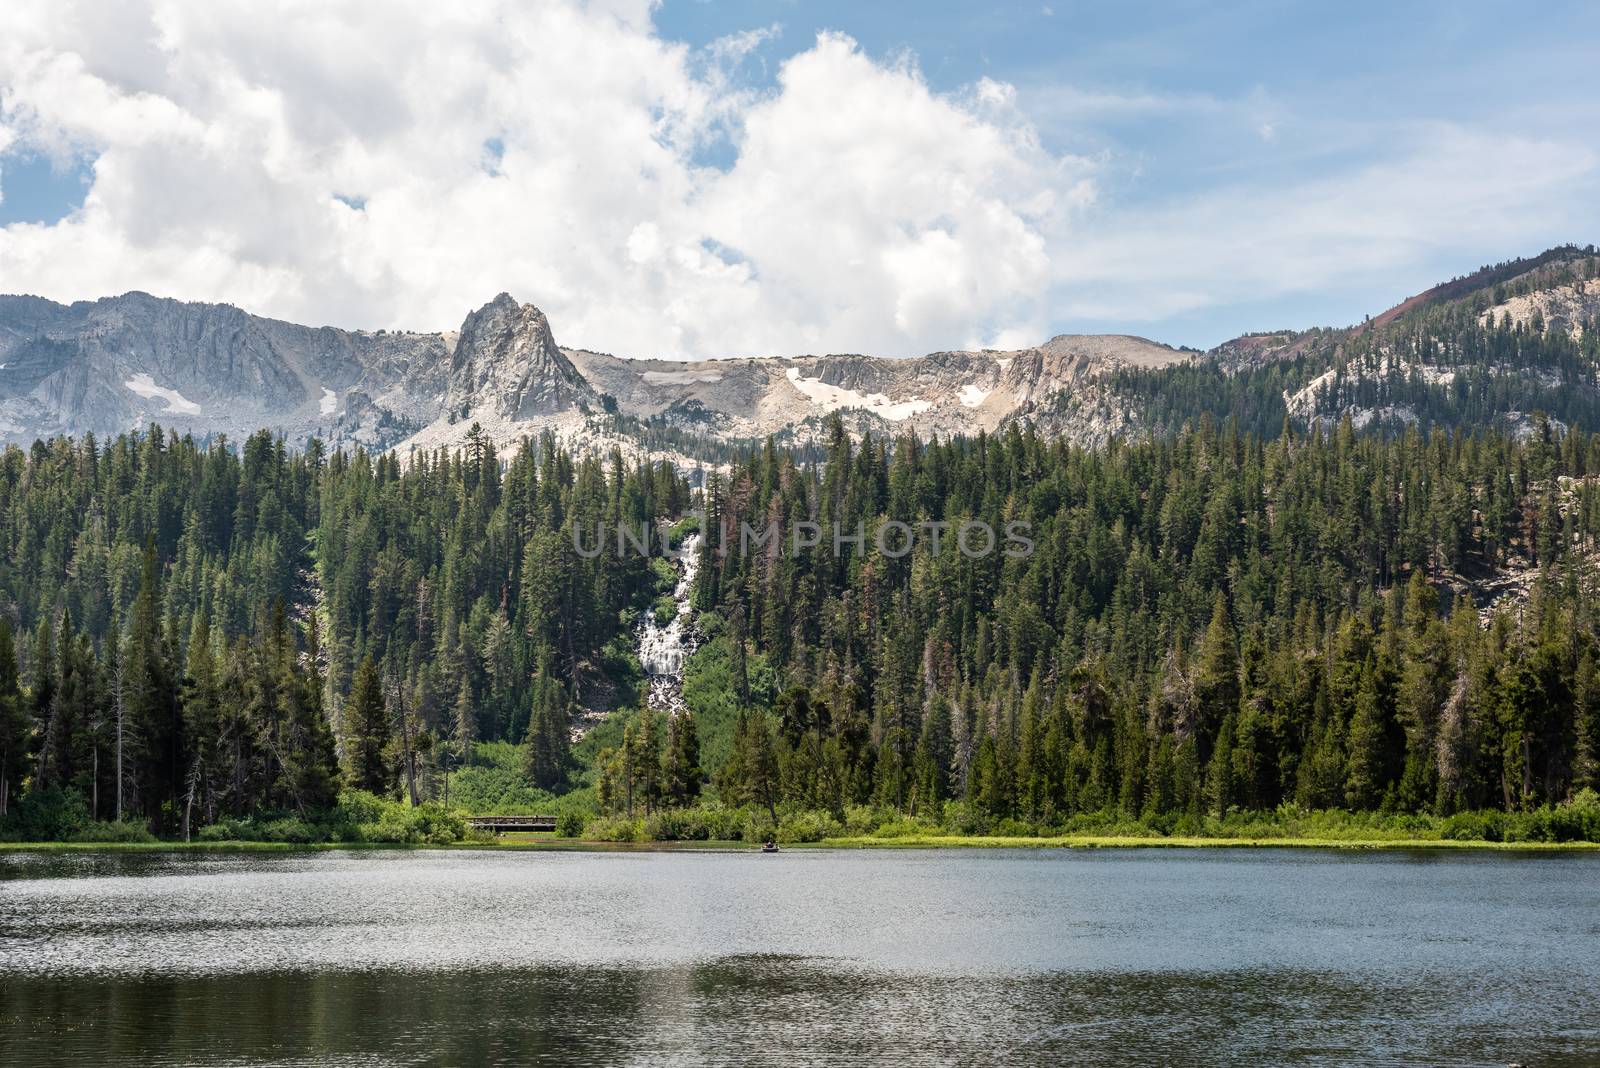 View of Twin Falls and Mammoth Rock from Twin Lakes in Mammoth Lakes, California